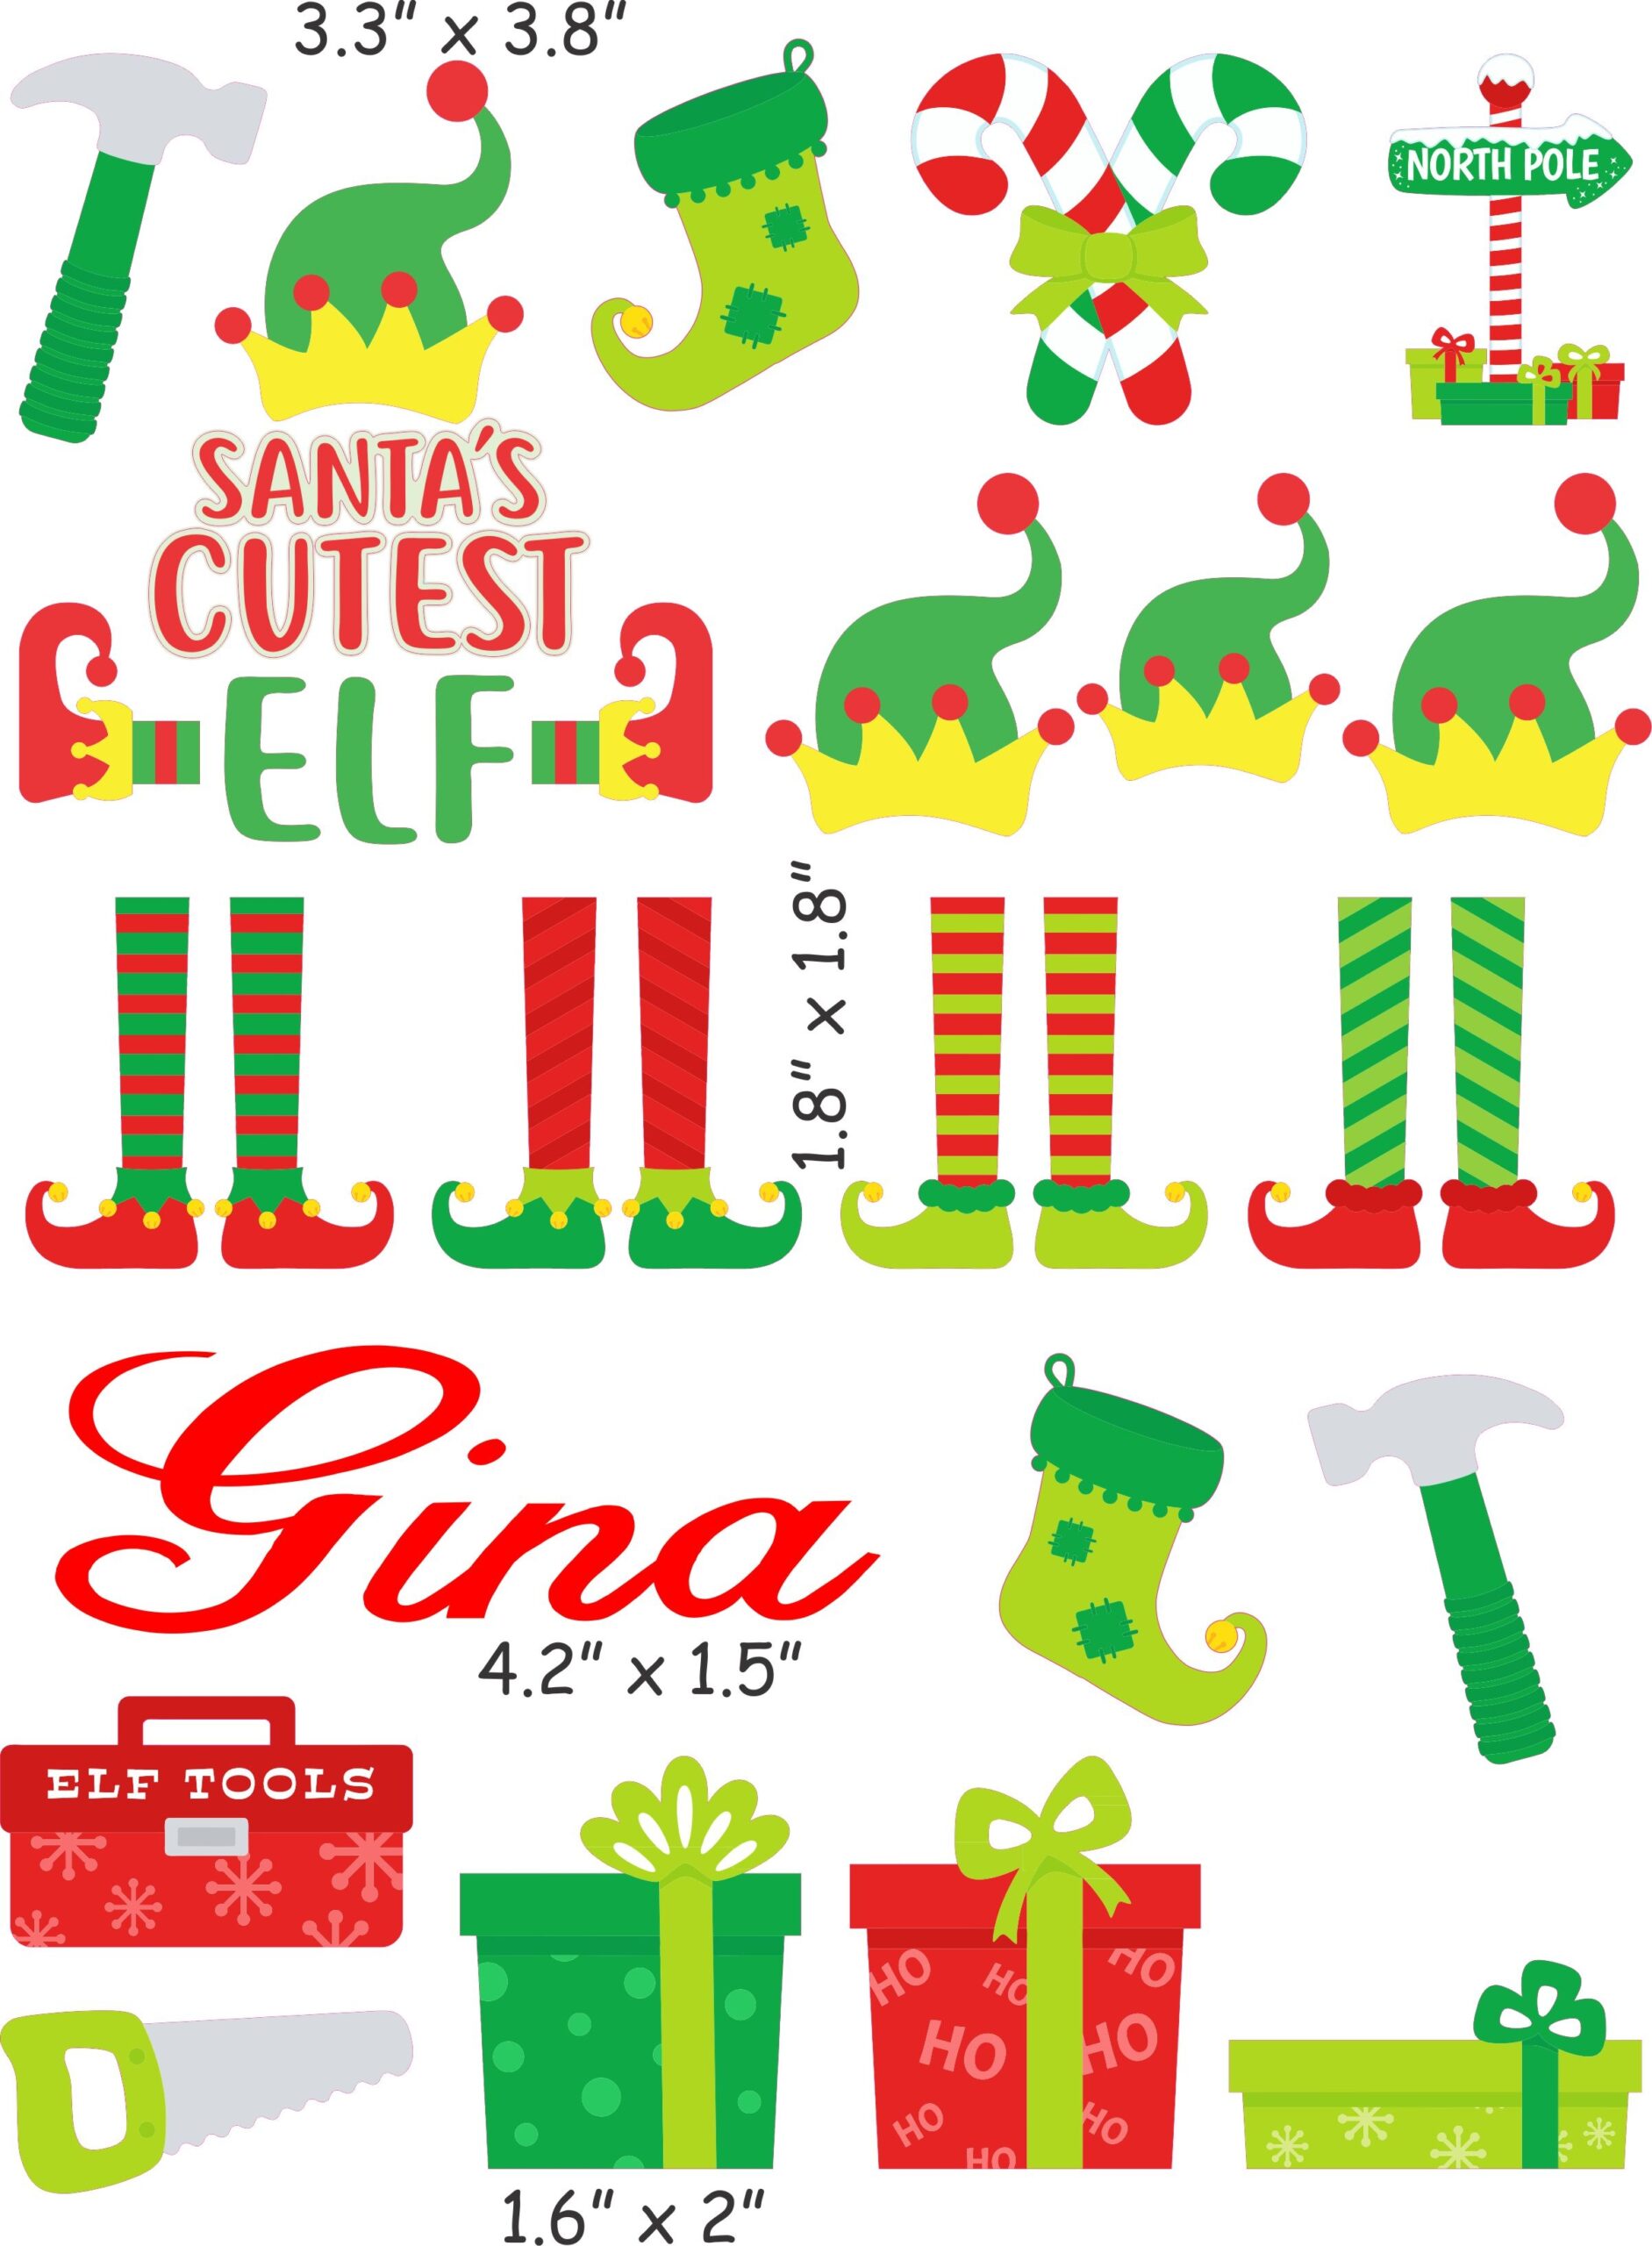 Santa’s Cutest Elf – Bling Your Band